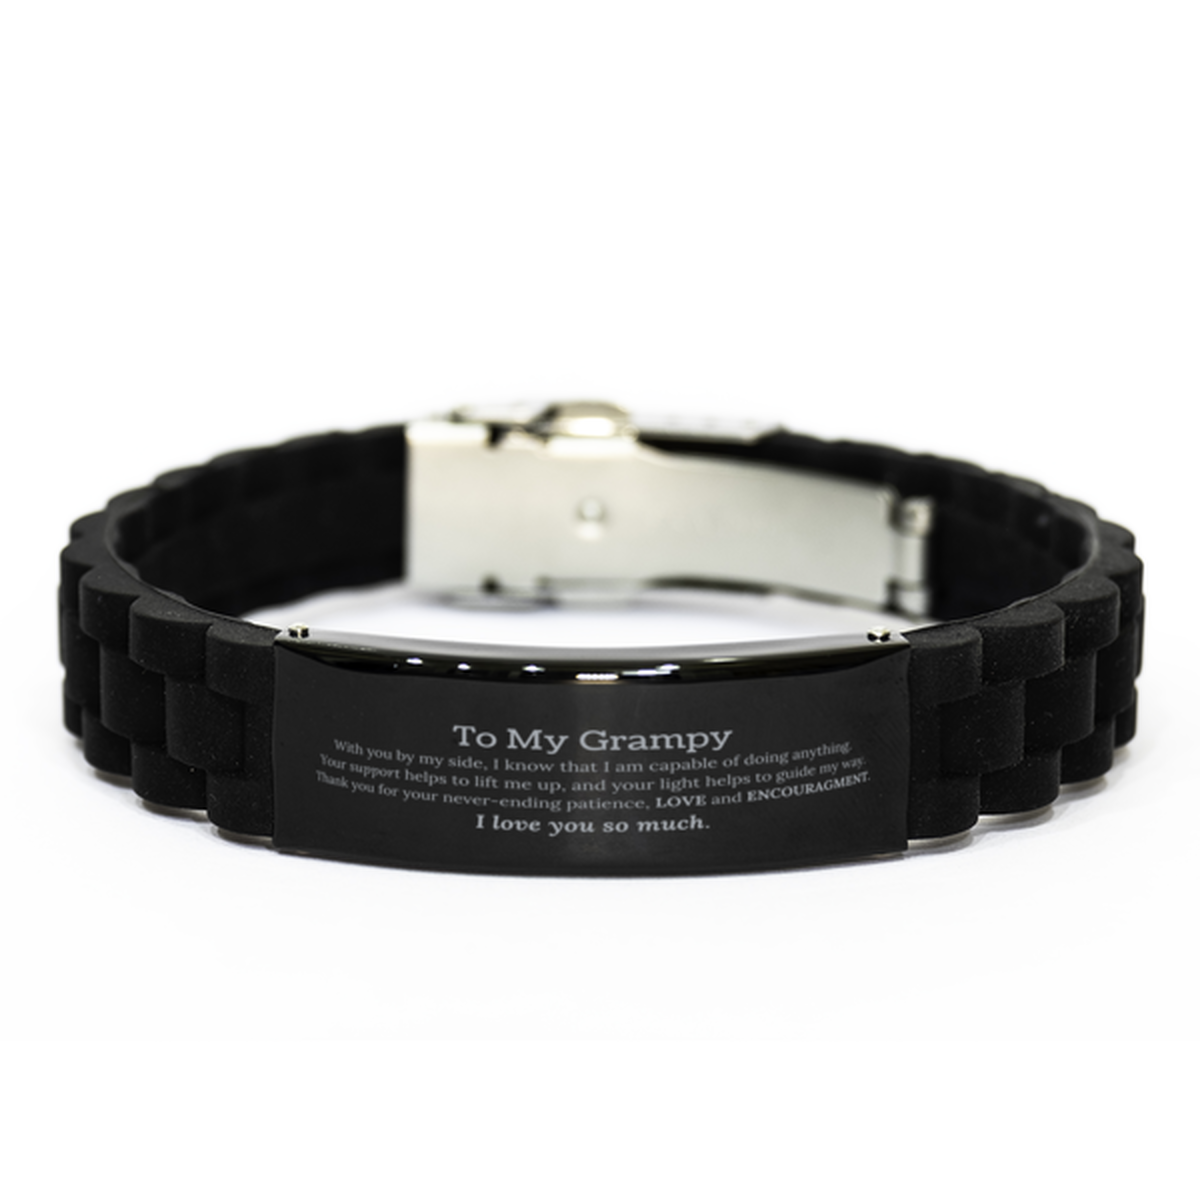 Appreciation Grampy Black Glidelock Clasp Bracelet Gifts, To My Grampy Birthday Christmas Wedding Keepsake Gifts for Grampy With you by my side, I know that I am capable of doing anything. I love you so much